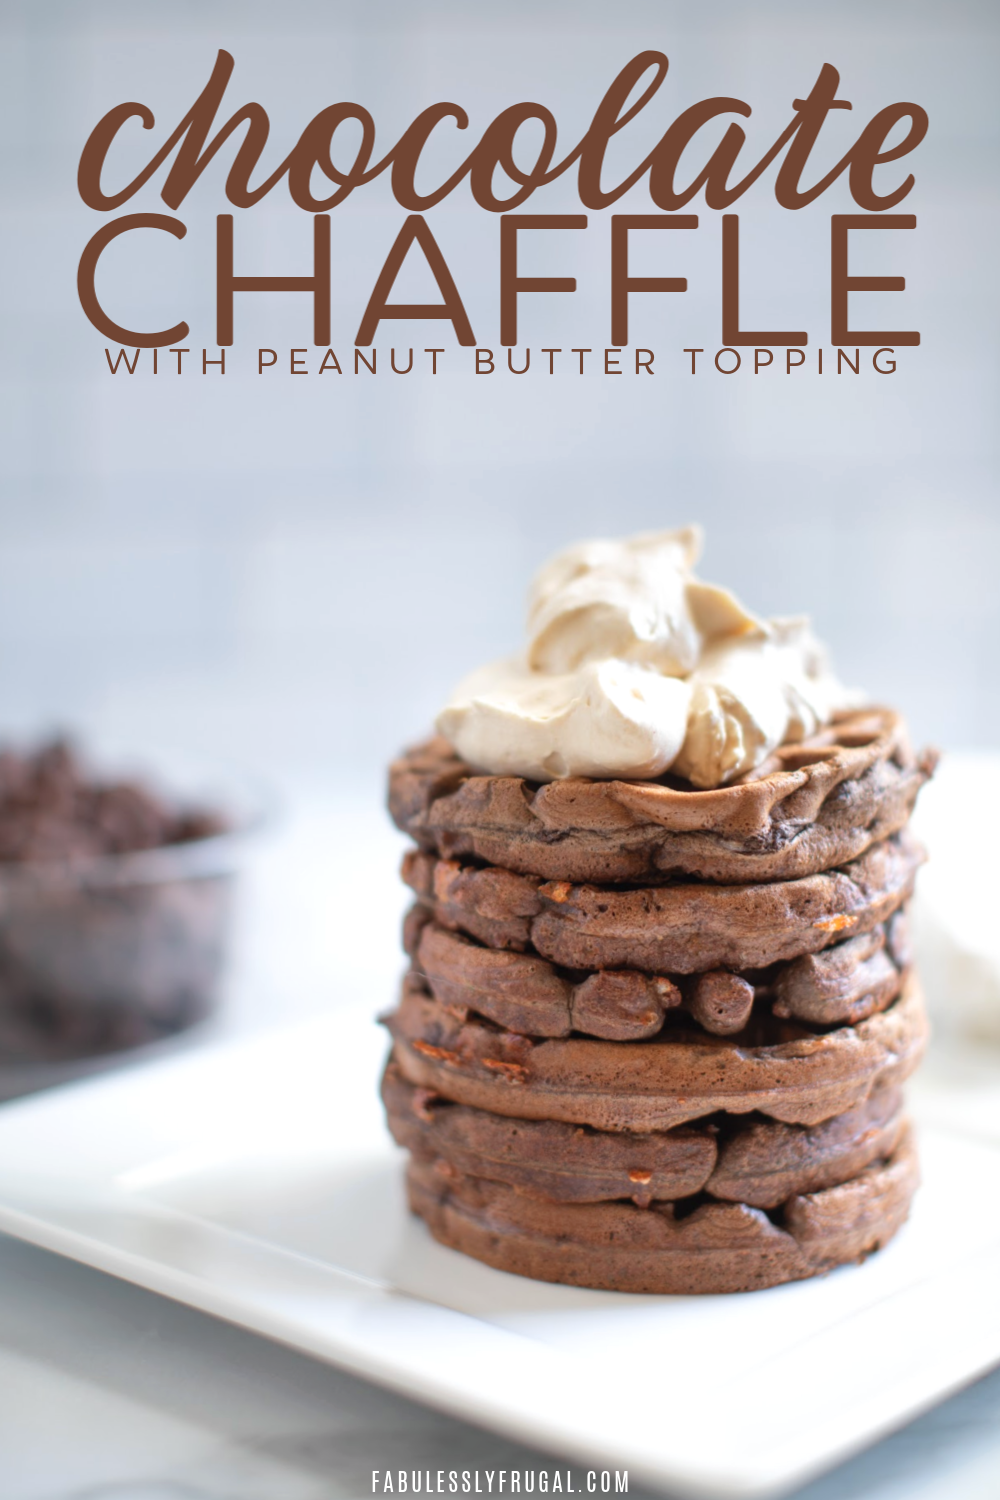 Stack of chocolate chaffles